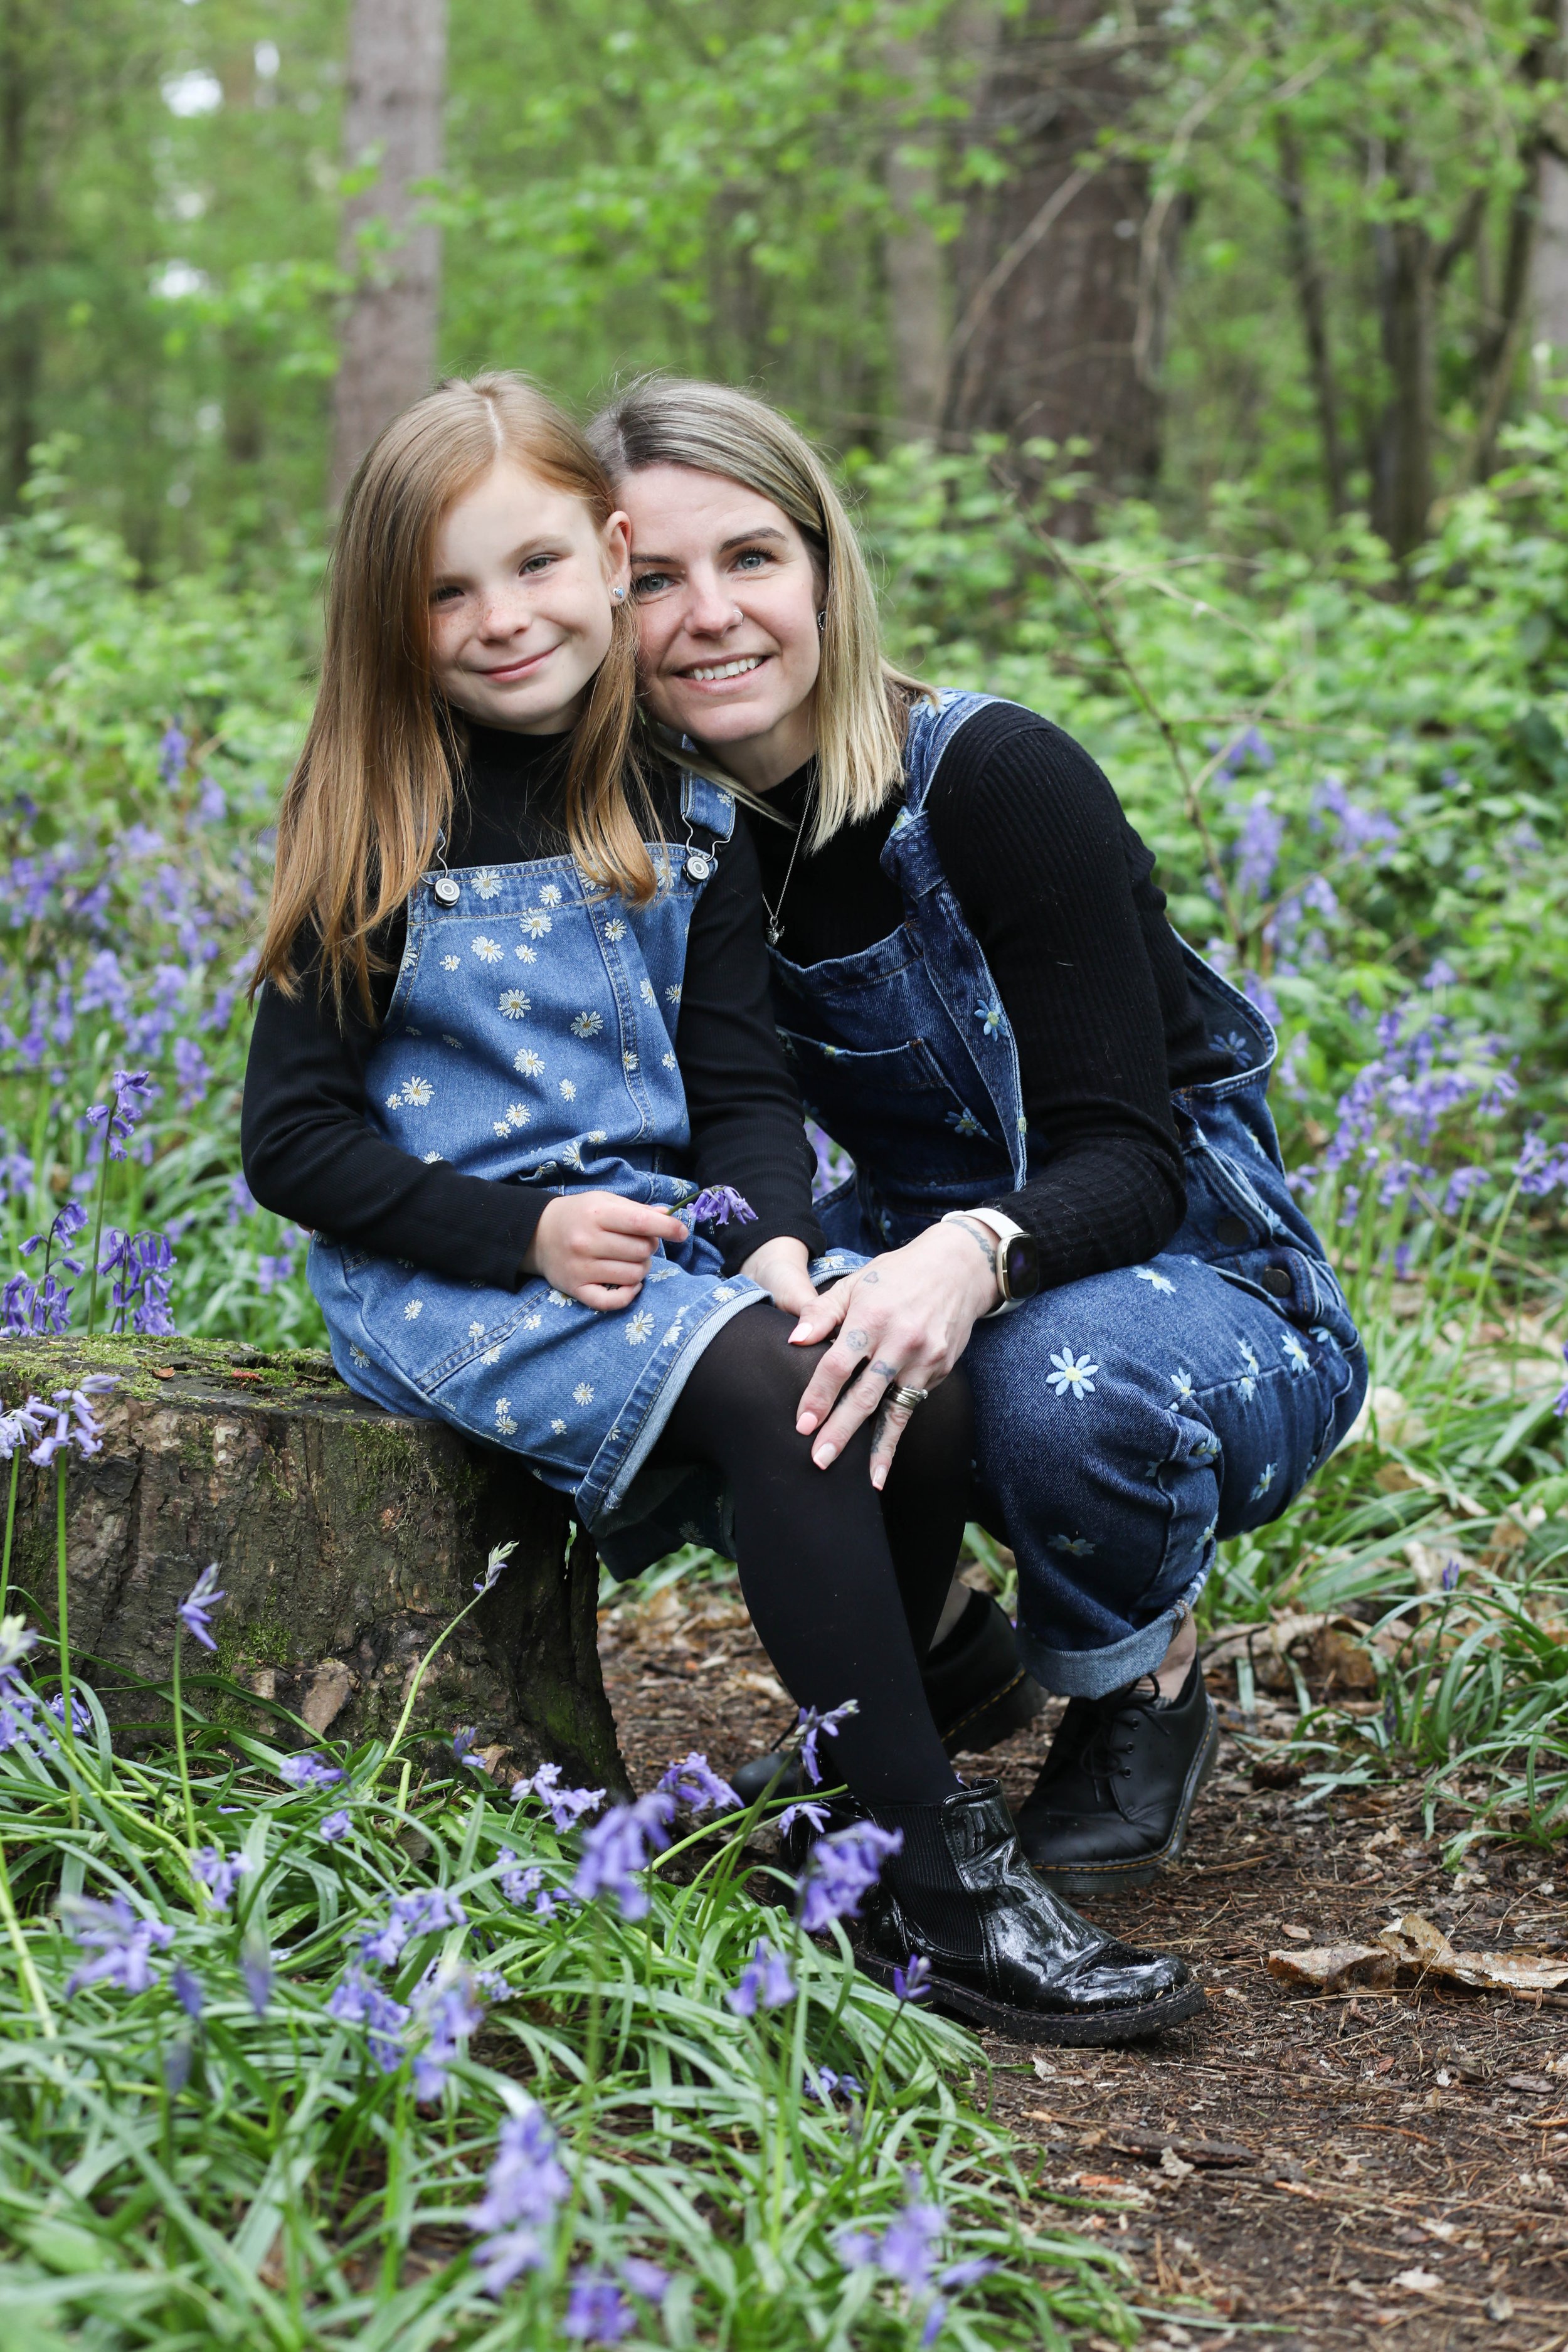 MUM AND DAUGHTER PHOTO SHOOT IN THE BLUEBELLS | BERKSHIRE PORTRAIT SHOOTS45 choice .JPG